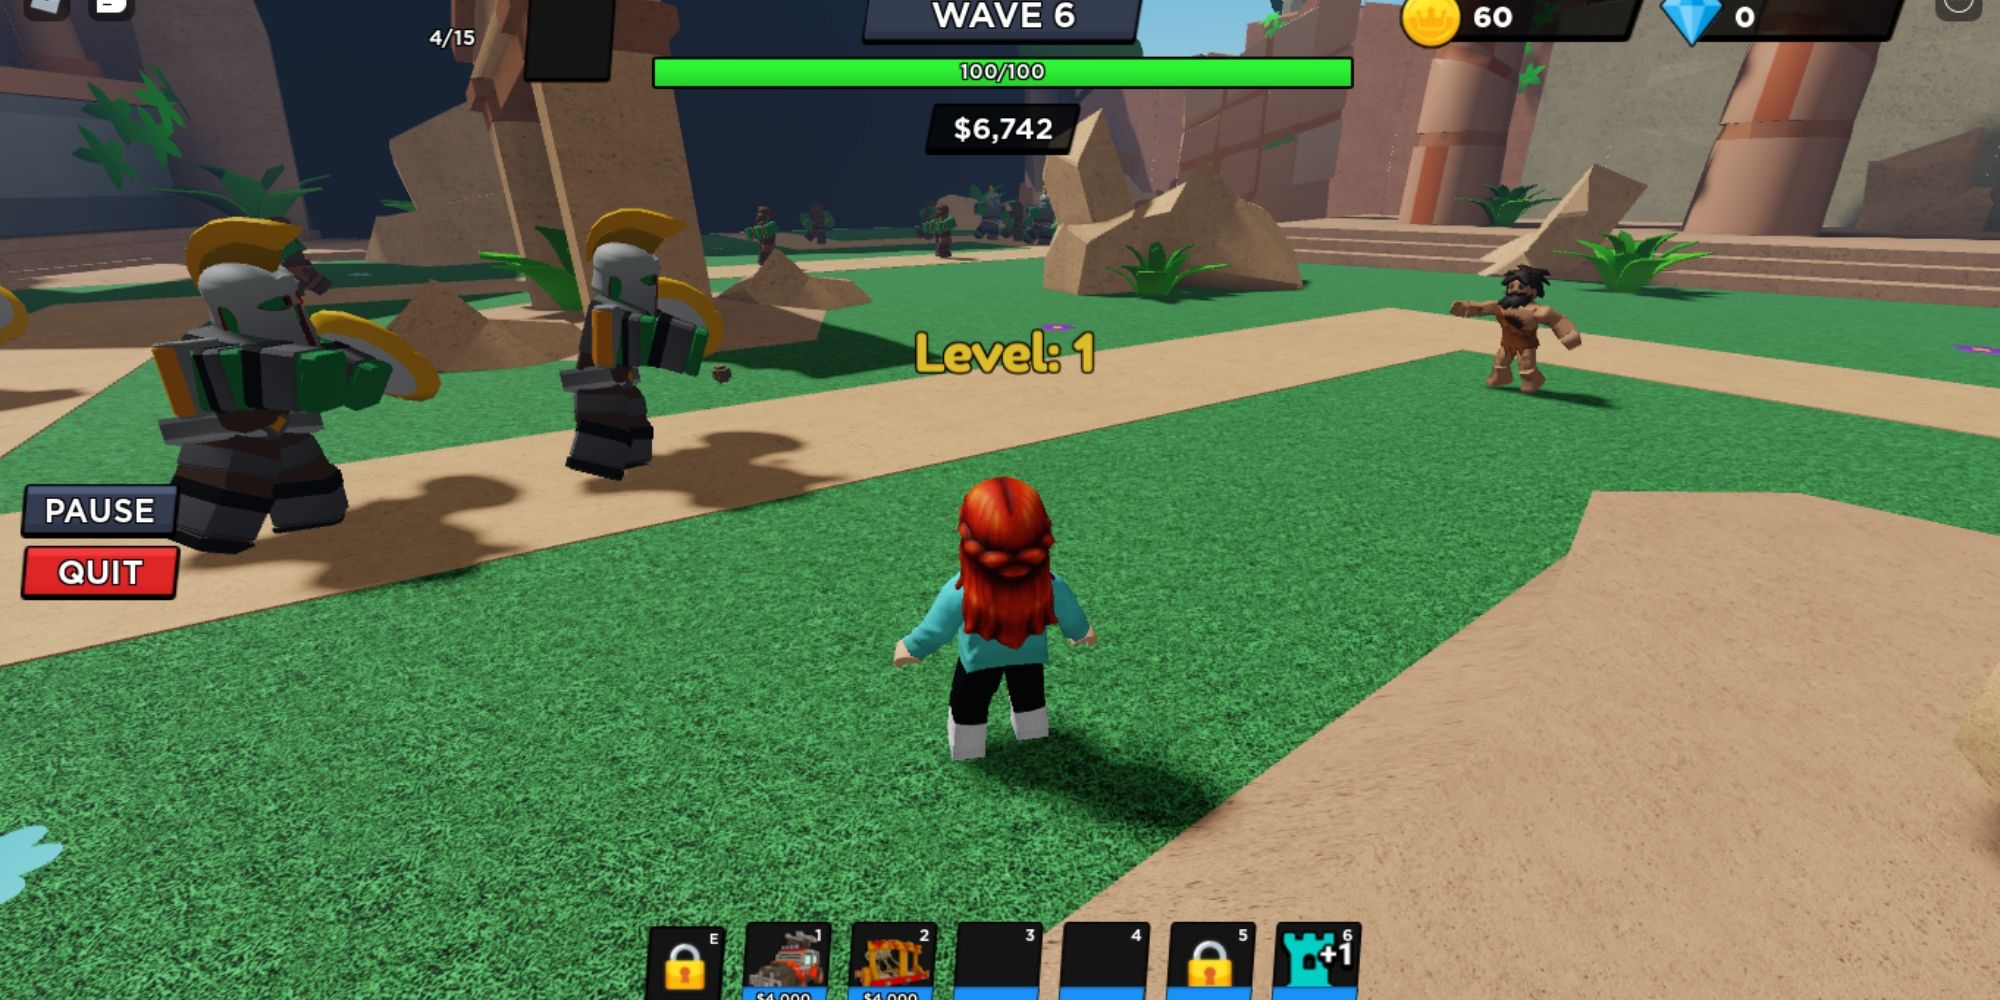 Two giant armored roblox enemies follow the path towards a lone man throwing rocks at them